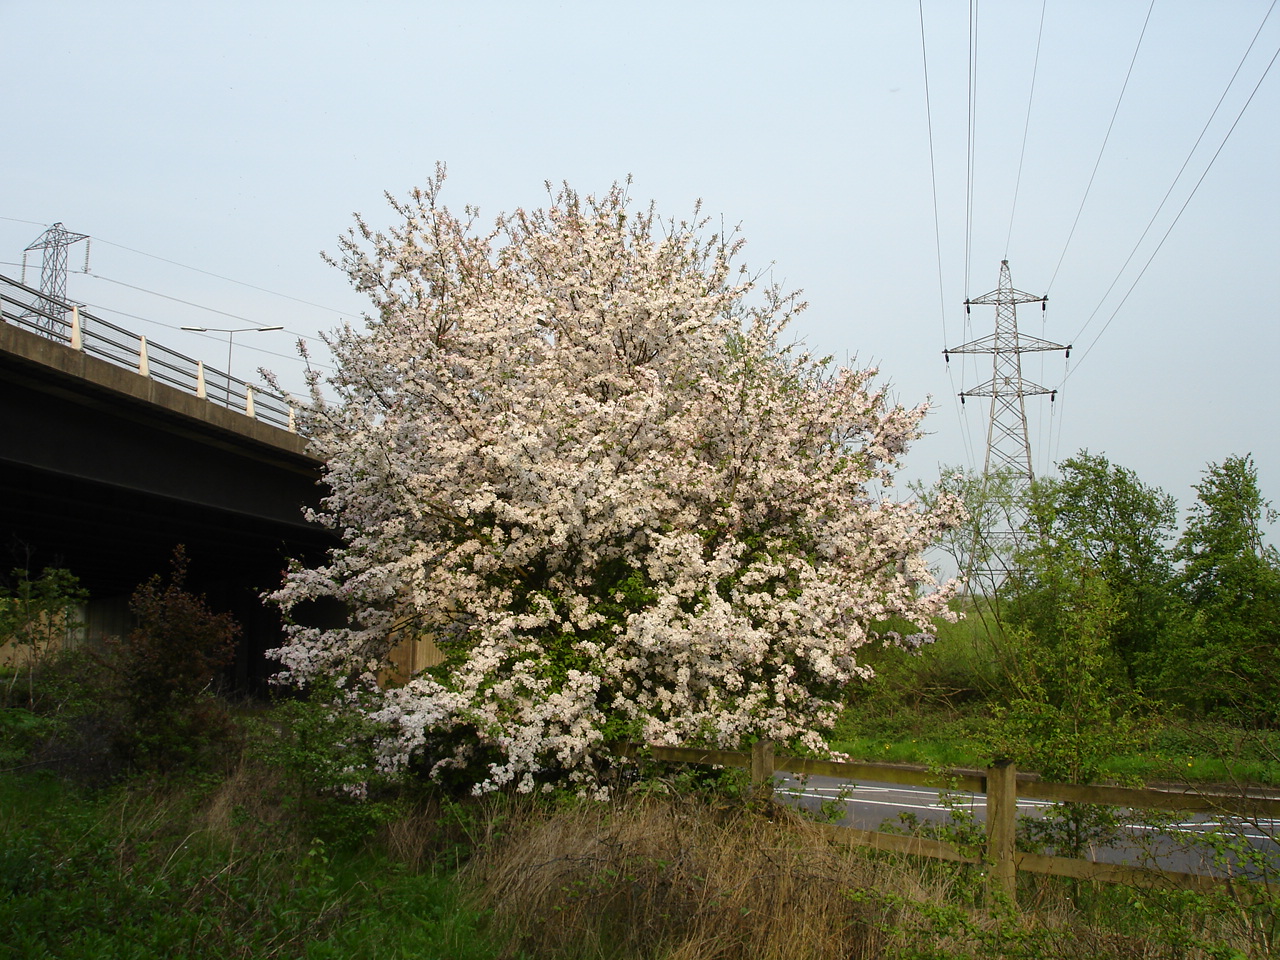 White flowering trees that signpost spring Act 2: Late Spring